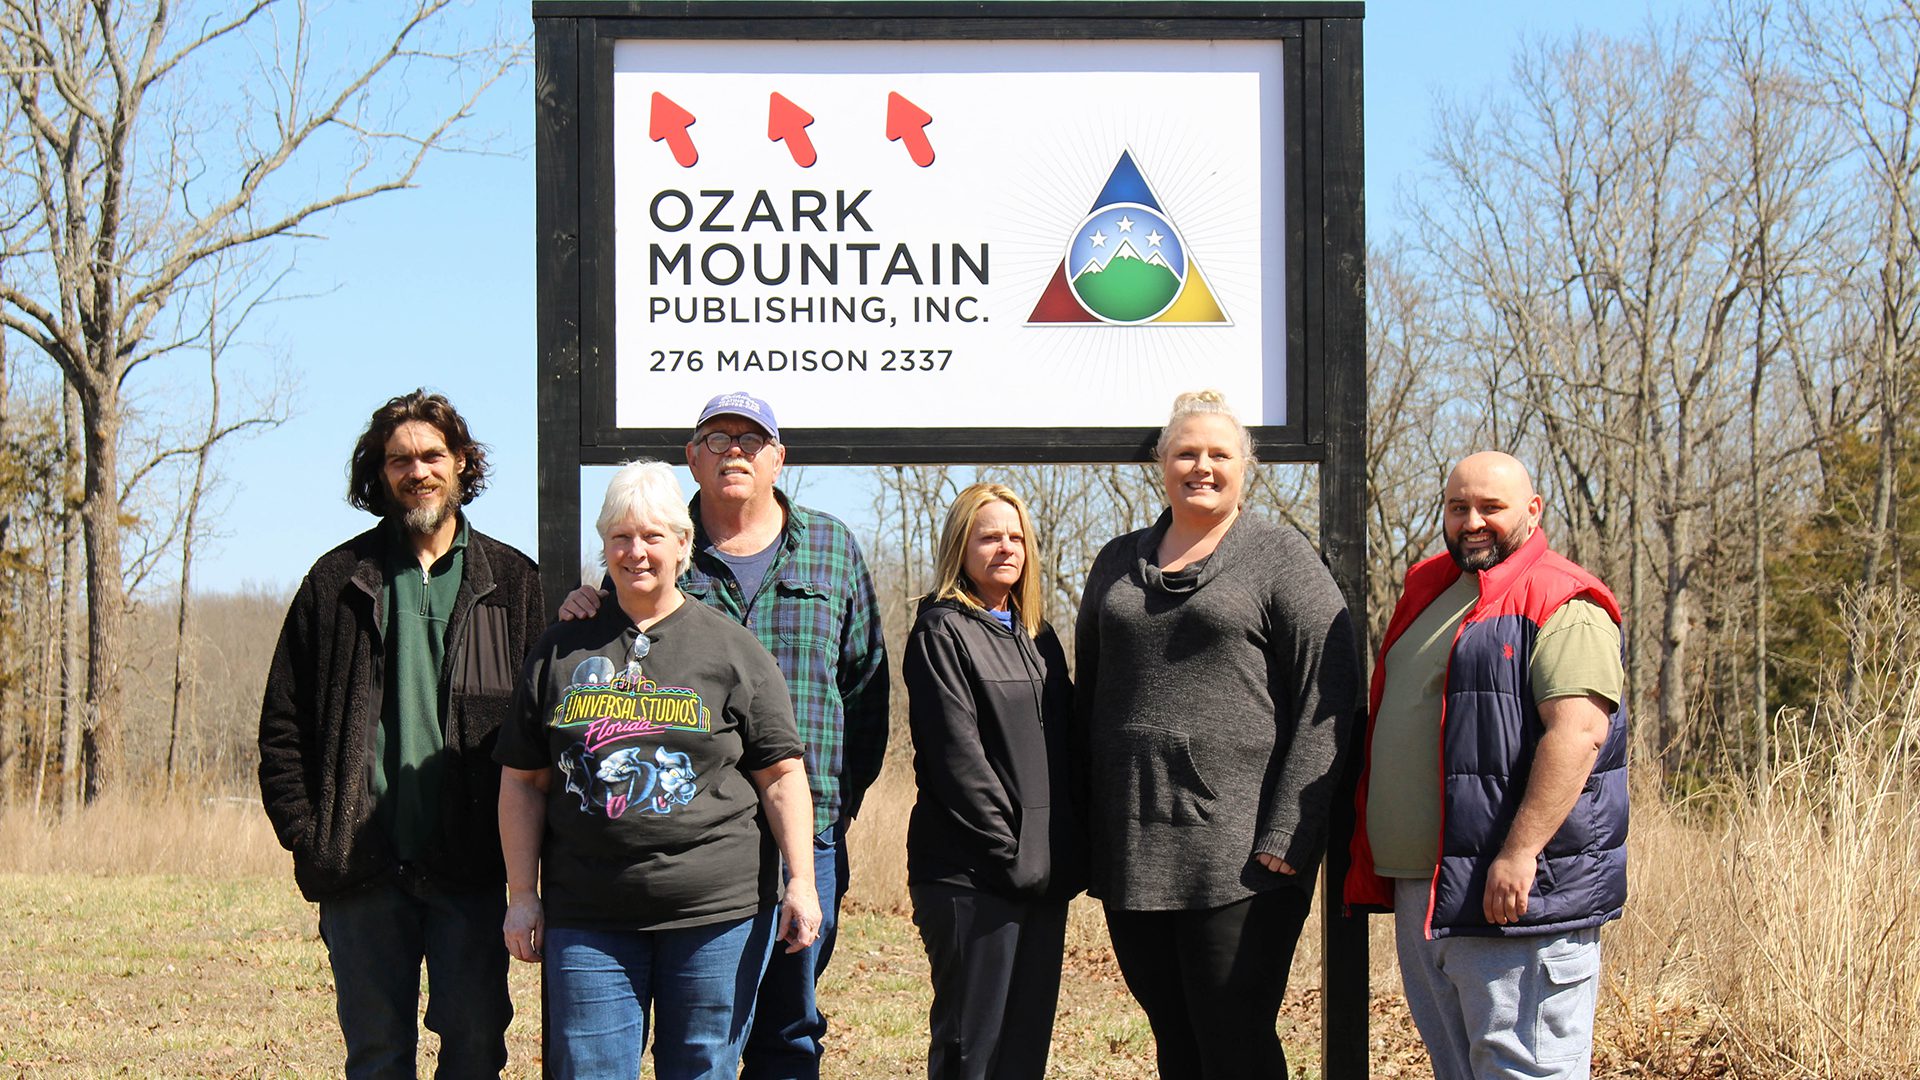 Group photo of three men and three women in front of an Ozark Mountain Publishing, Inc. signage